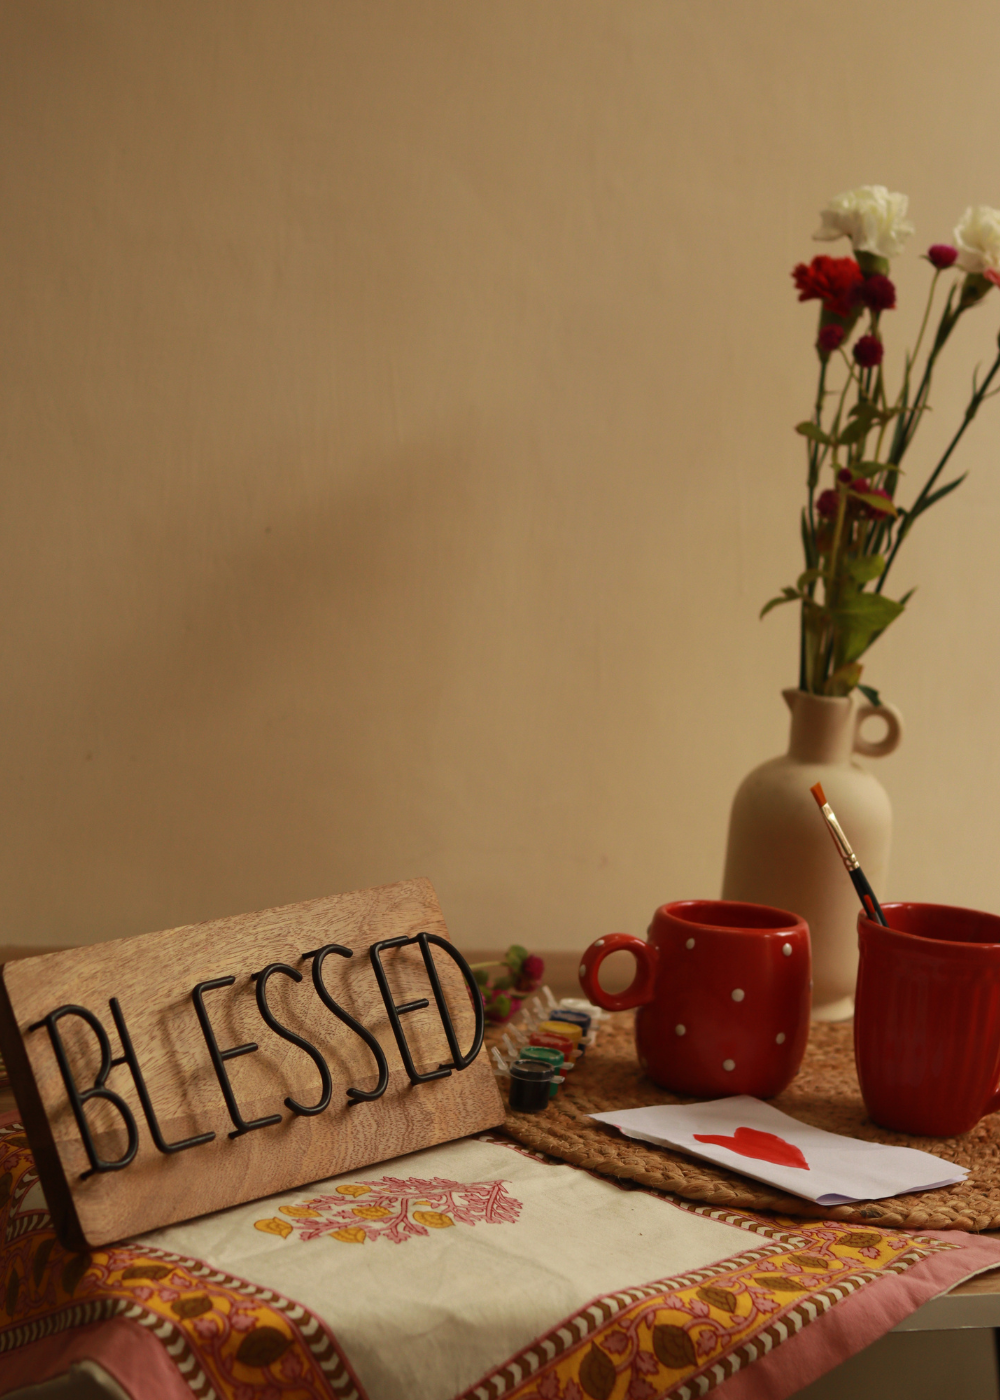 Blessed wall hanging board with cups and vase